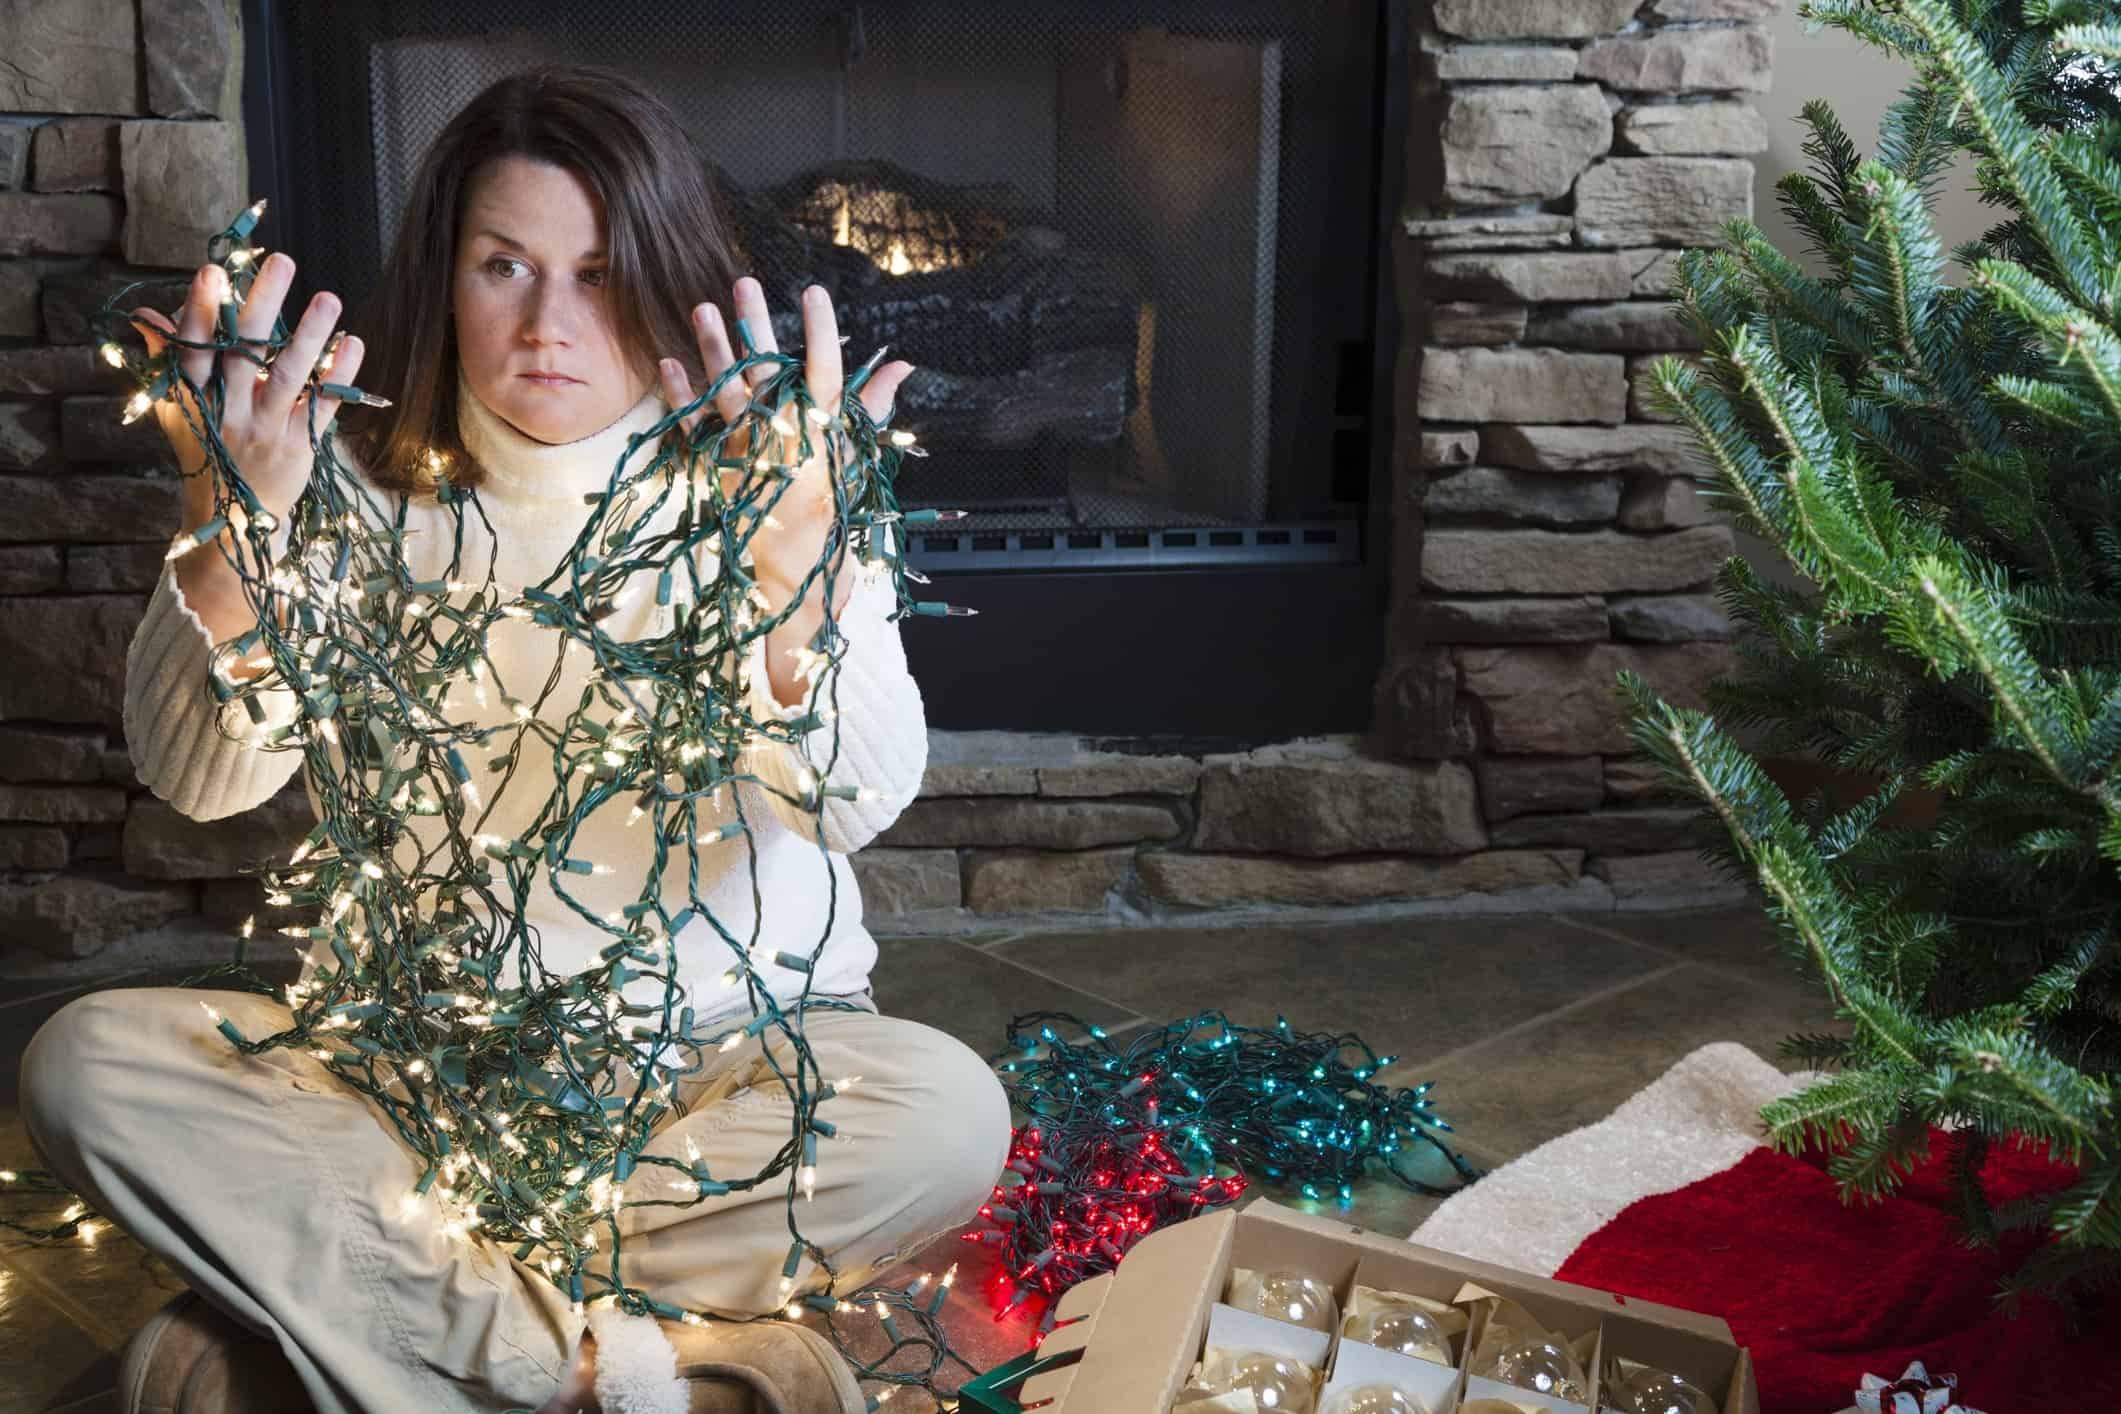 Young woman sitting next to Christmas tree holding entangled string of lights